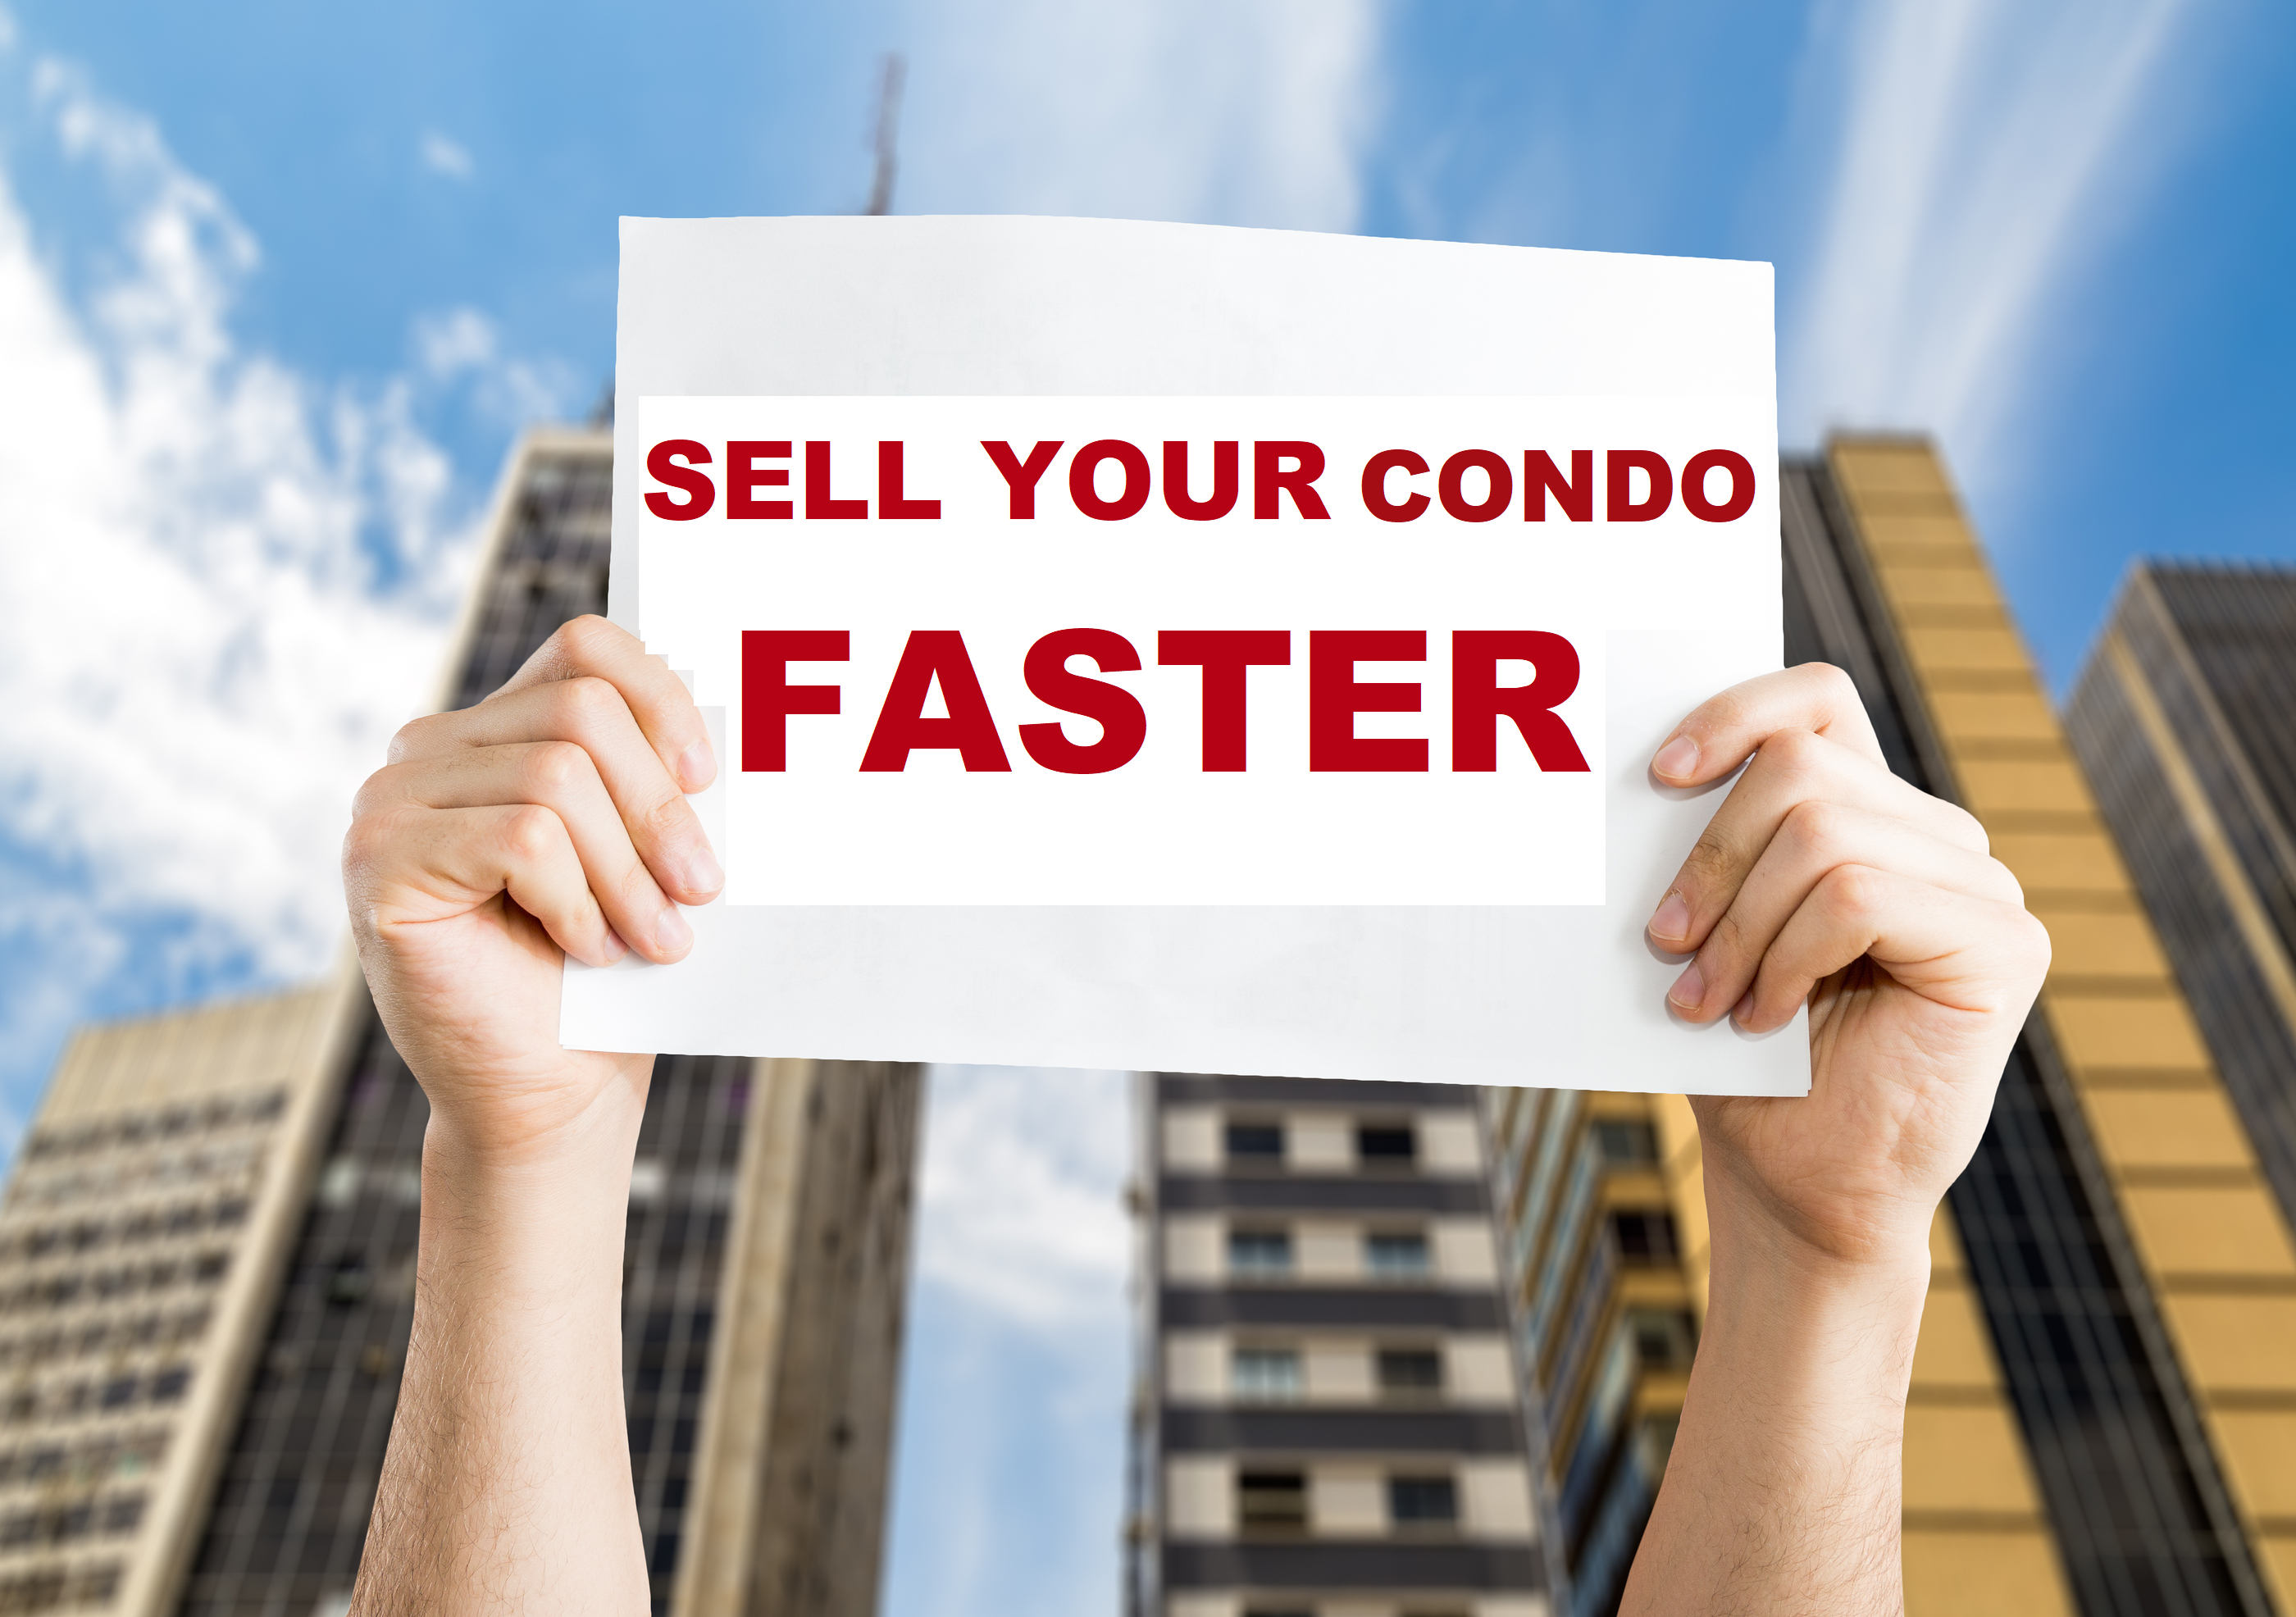 Sell your condo faster for Jean-Luc Andriot blog 061518